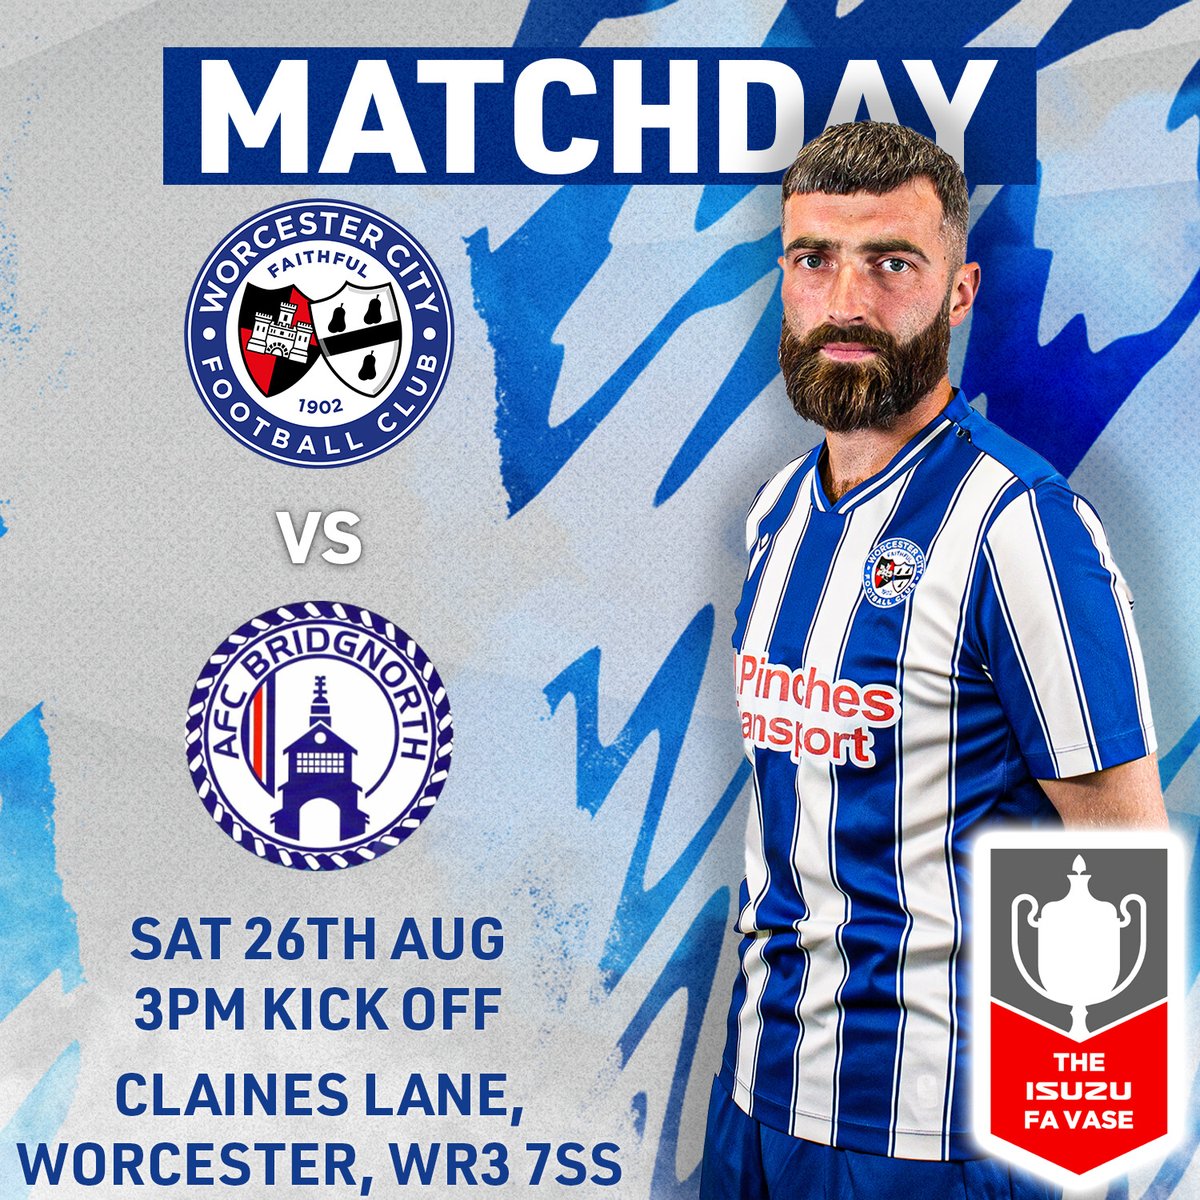 Our focus is the #FAVASE this weekend. We welcome @AFCBridgnorth to Claines Lane on Saturday for a 3pm kick off. Tickets and parking passes available now 👇 wcfcshop.com/product-catego…